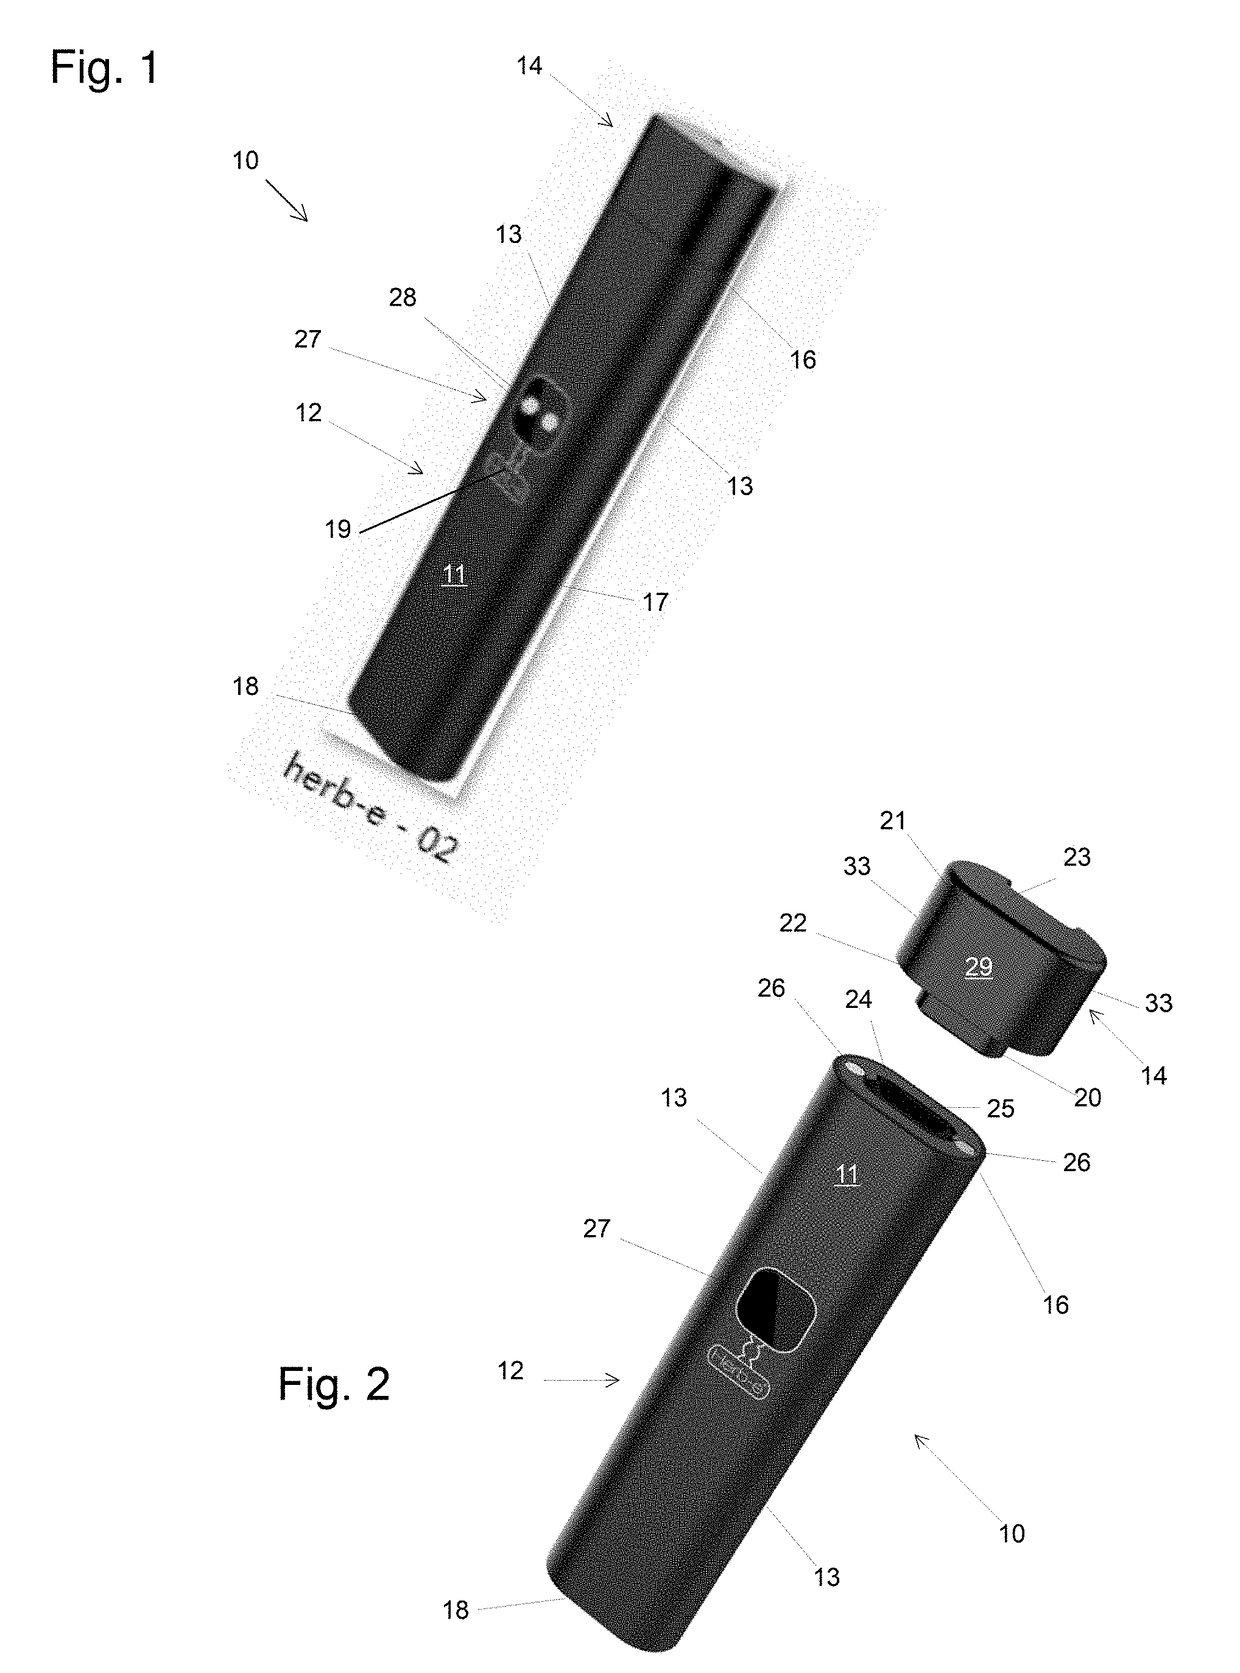 Vaporizer having adjustable atomizer and removable screen